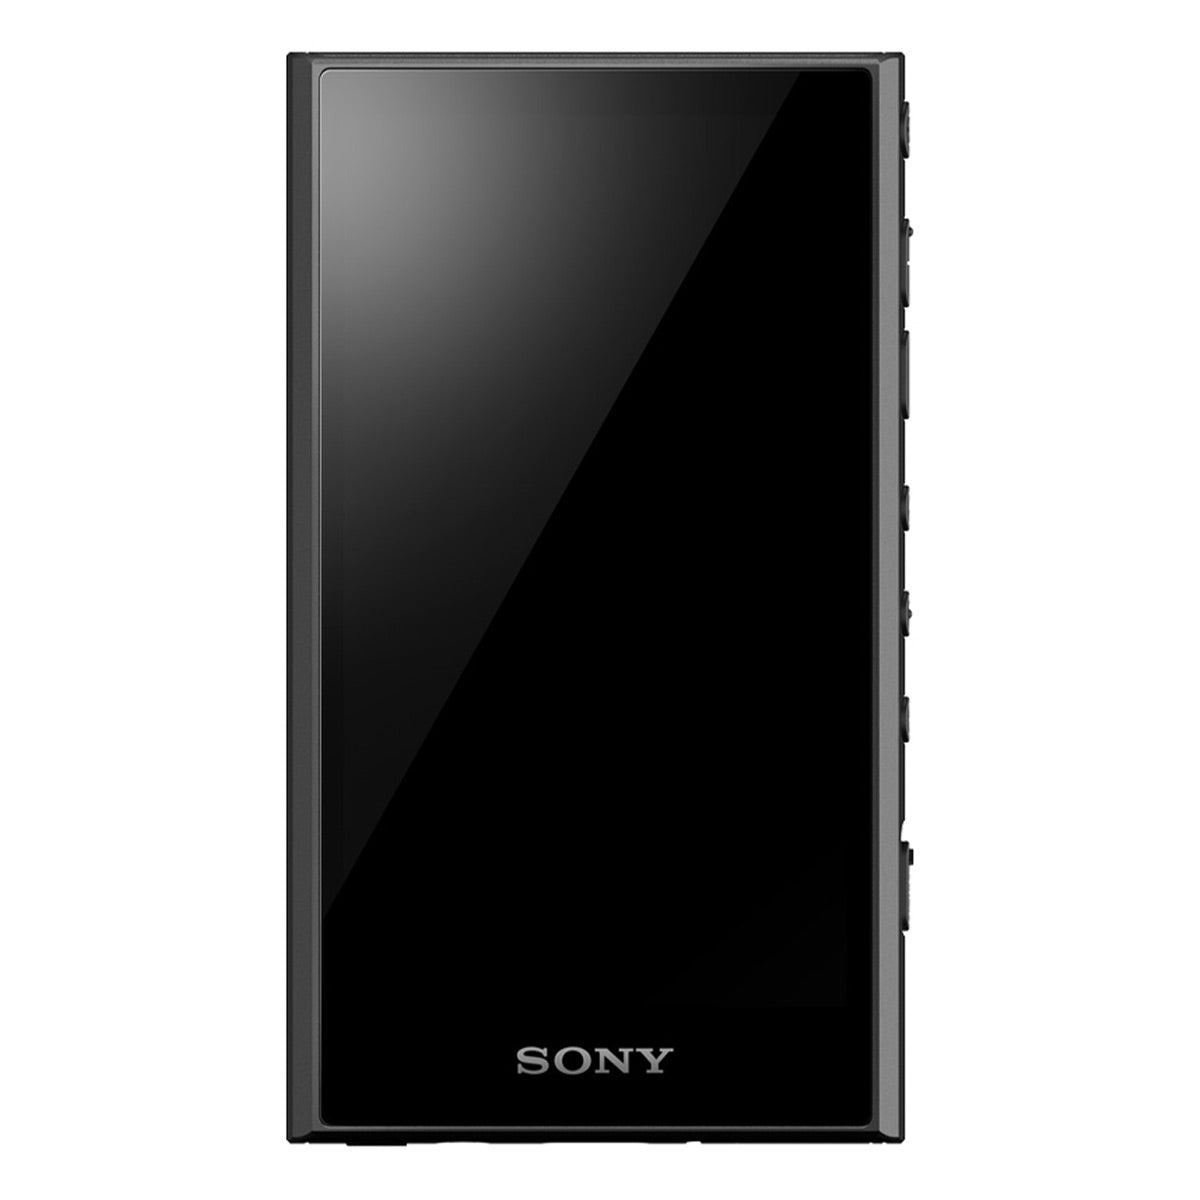 Sony NW-A306 Walkman A Series Hi-Res Digital Music Player with WiFi, Bluetooth, & Expandable Storage